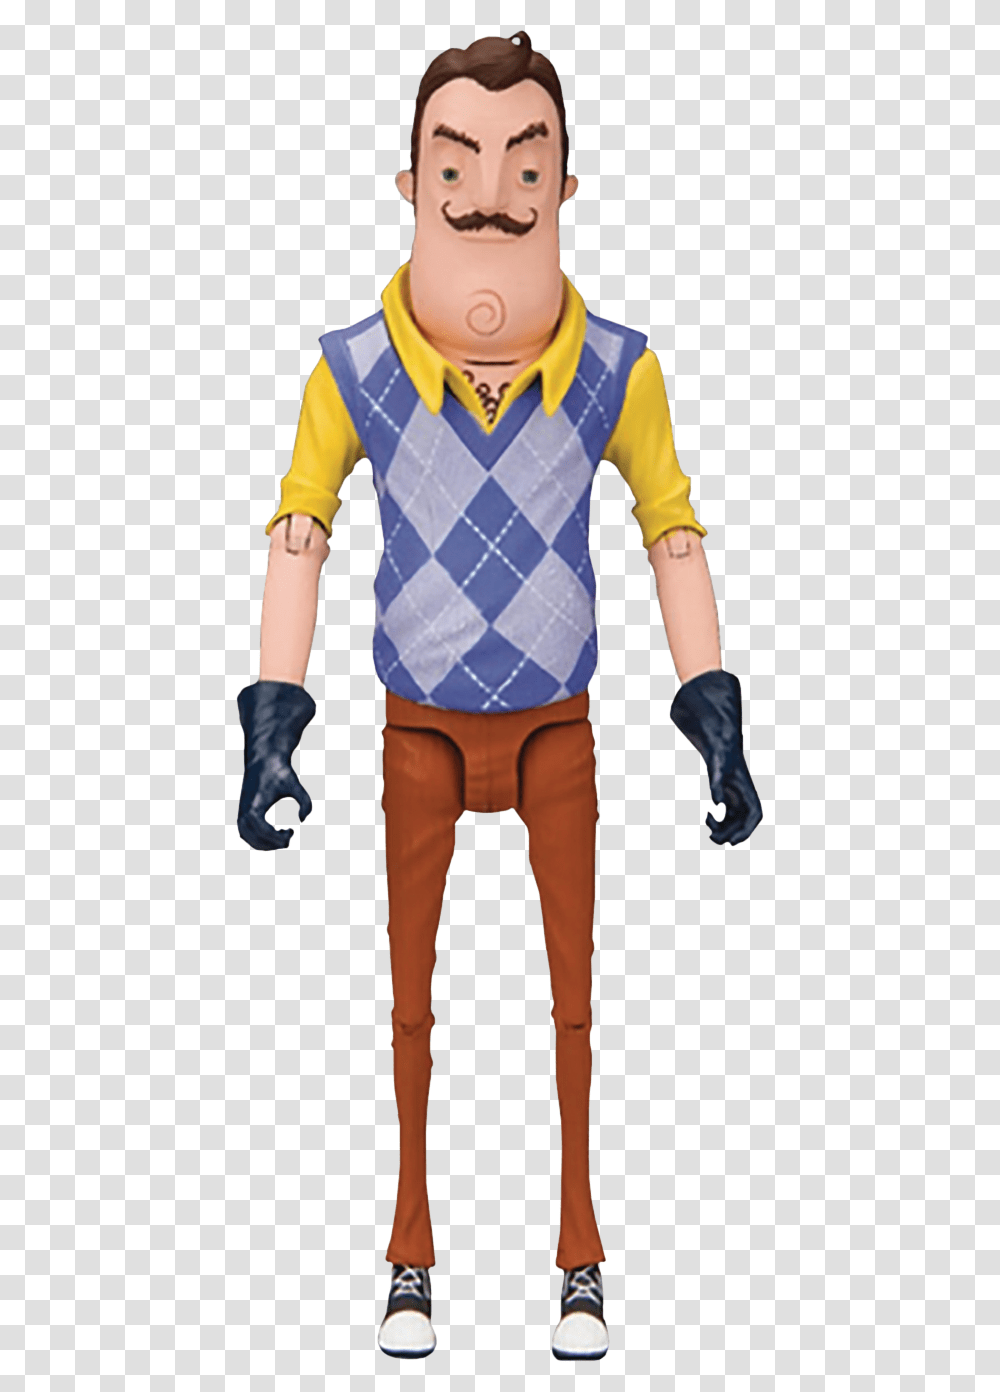 Hello Neighbor The Neighbor 5 Action Figure By Mcfarlane Hello Neighbor Action Figure, Costume, Person, Boy Transparent Png